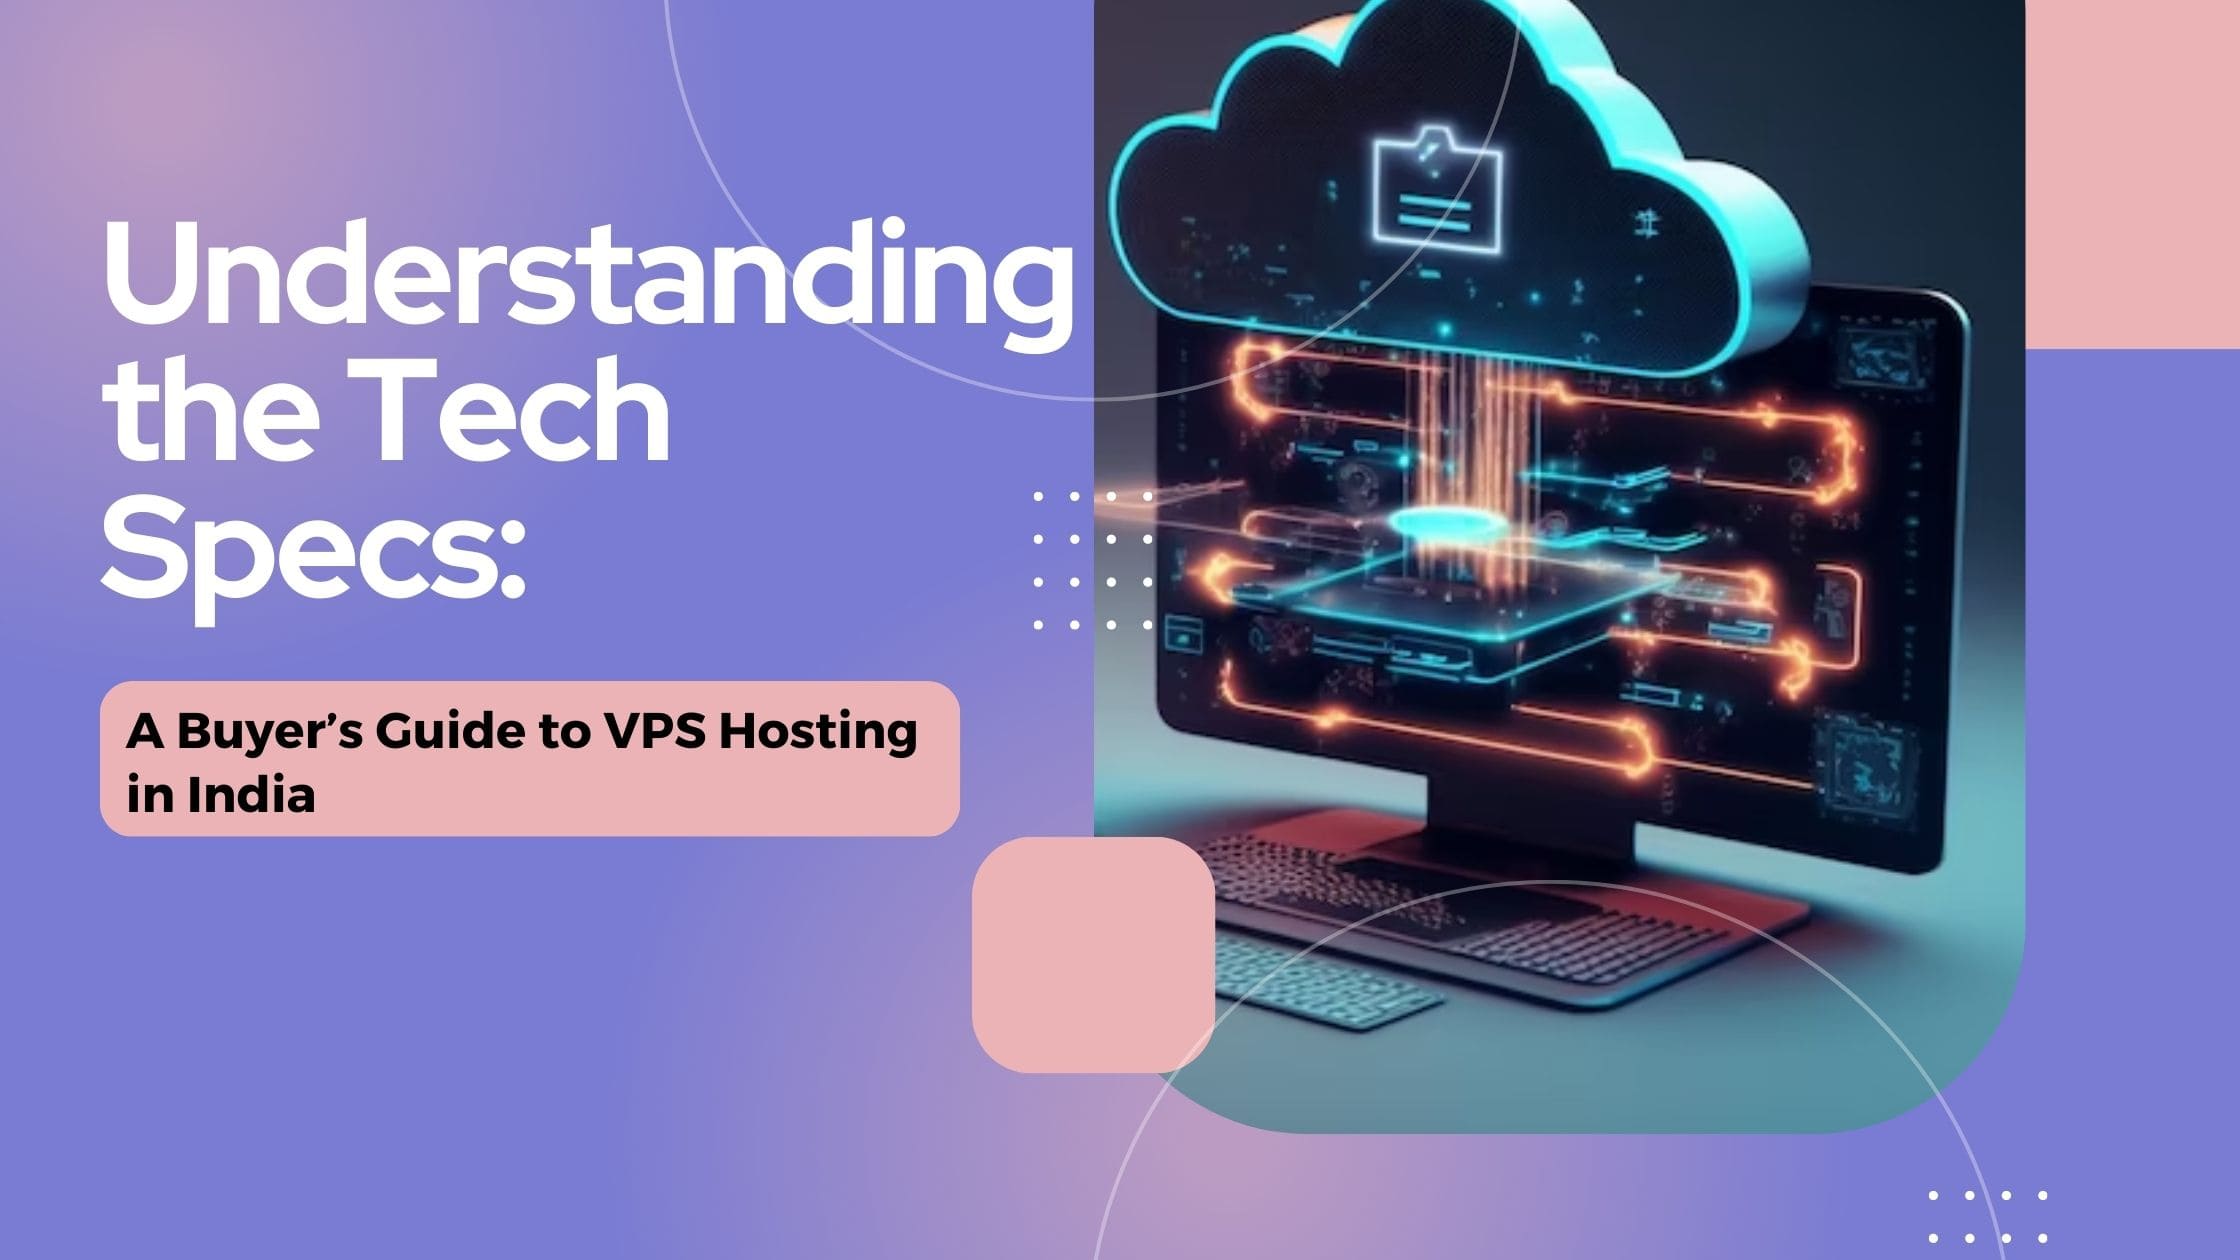 Understanding the Tech Specs: A Buyer’s Guide to VPS Hosting in India